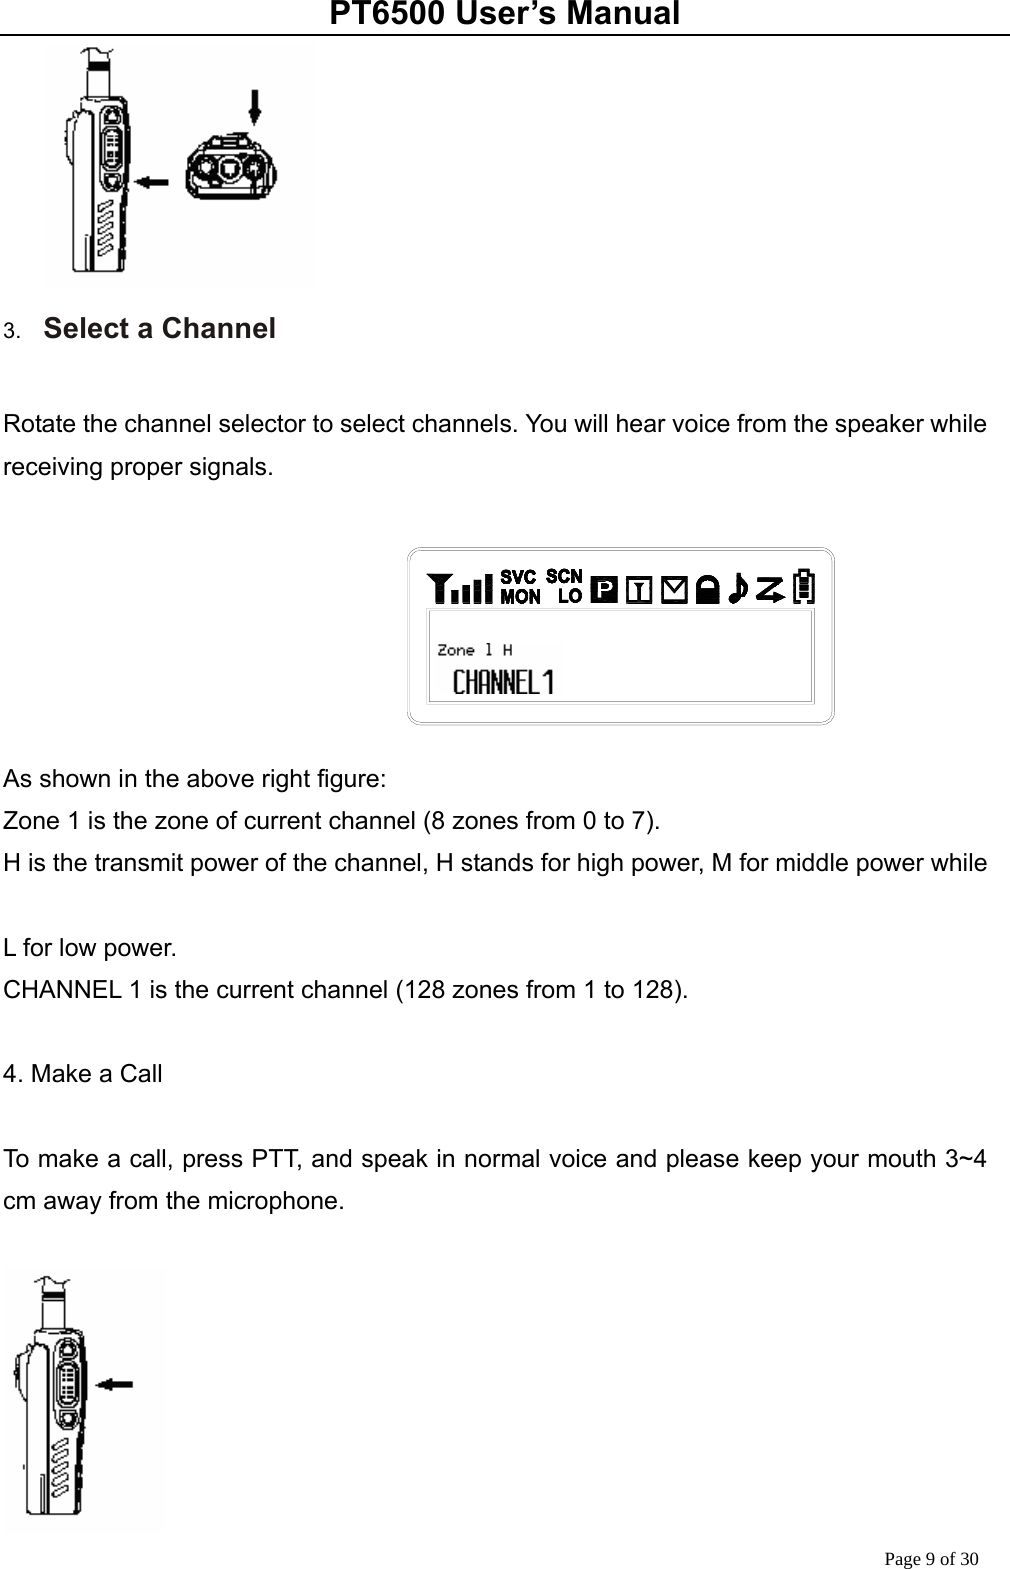 PT6500 User’s Manual Page 9 of 30  3.  Select a Channel  Rotate the channel selector to select channels. You will hear voice from the speaker while receiving proper signals.         As shown in the above right figure: Zone 1 is the zone of current channel (8 zones from 0 to 7). H is the transmit power of the channel, H stands for high power, M for middle power while    L for low power. CHANNEL 1 is the current channel (128 zones from 1 to 128).        4. Make a Call  To make a call, press PTT, and speak in normal voice and please keep your mouth 3~4 cm away from the microphone.   